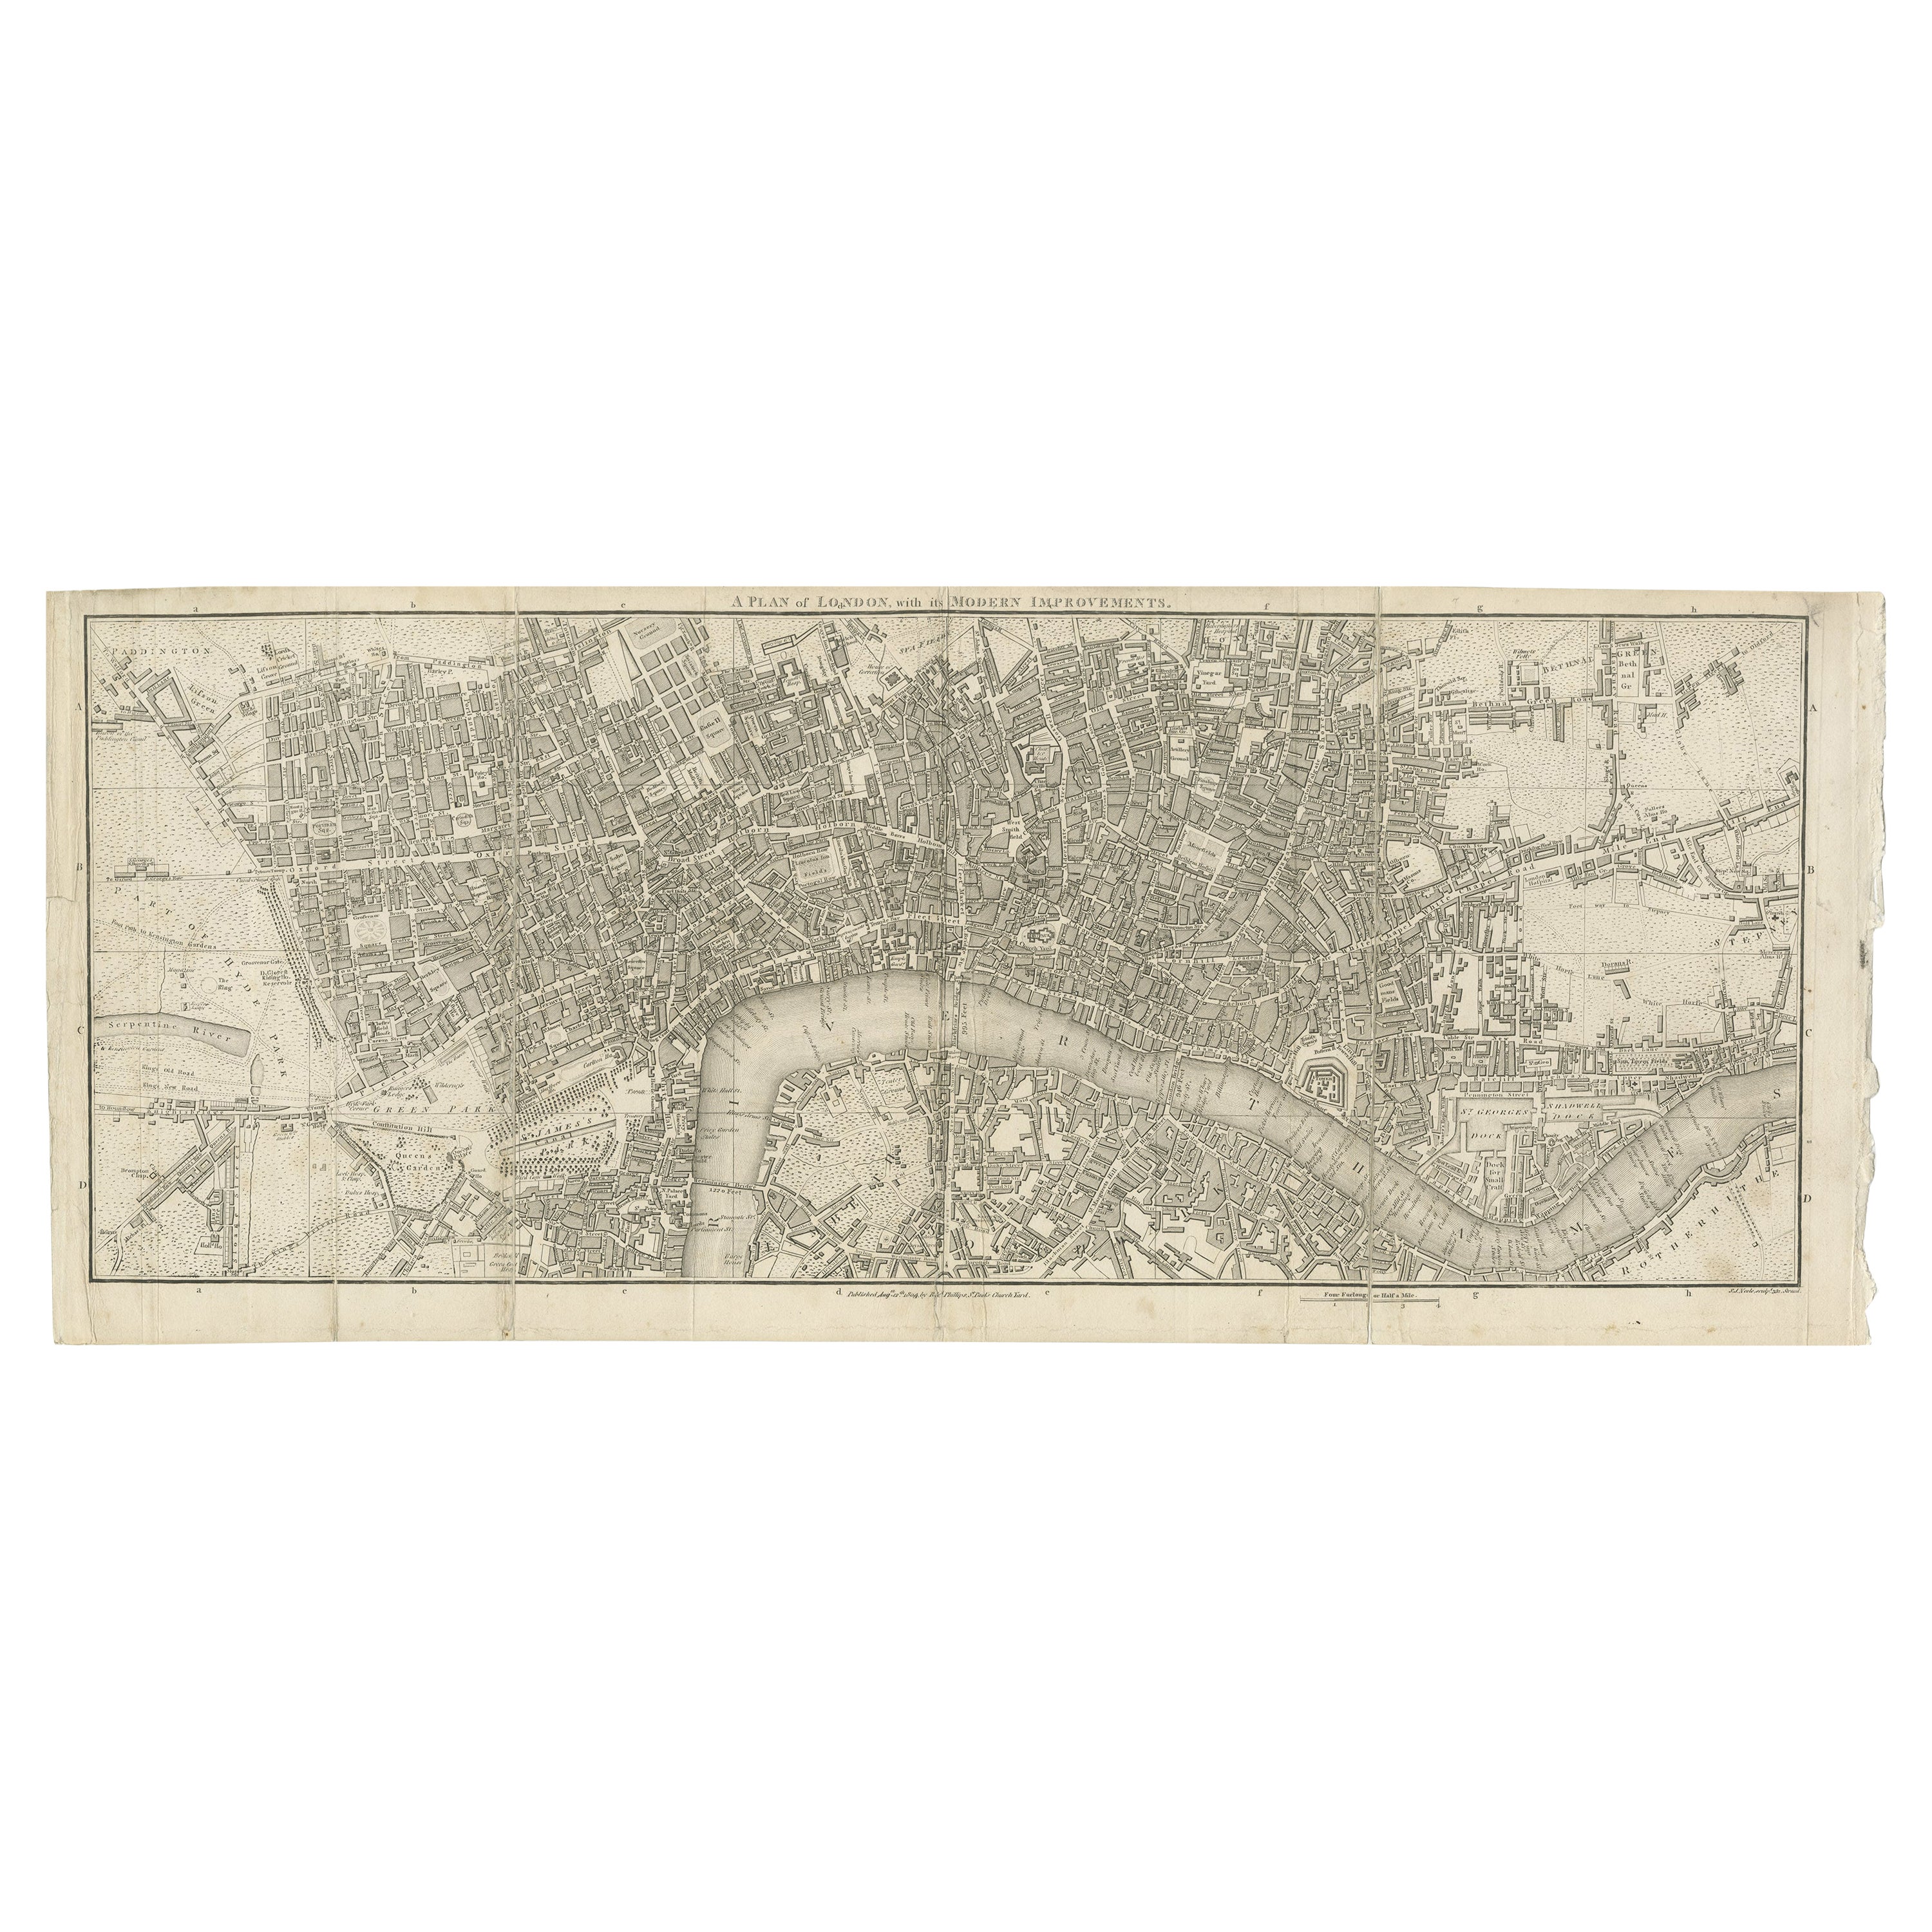 Antique Copper Engraving of Folding Plan of London, Published in 1804